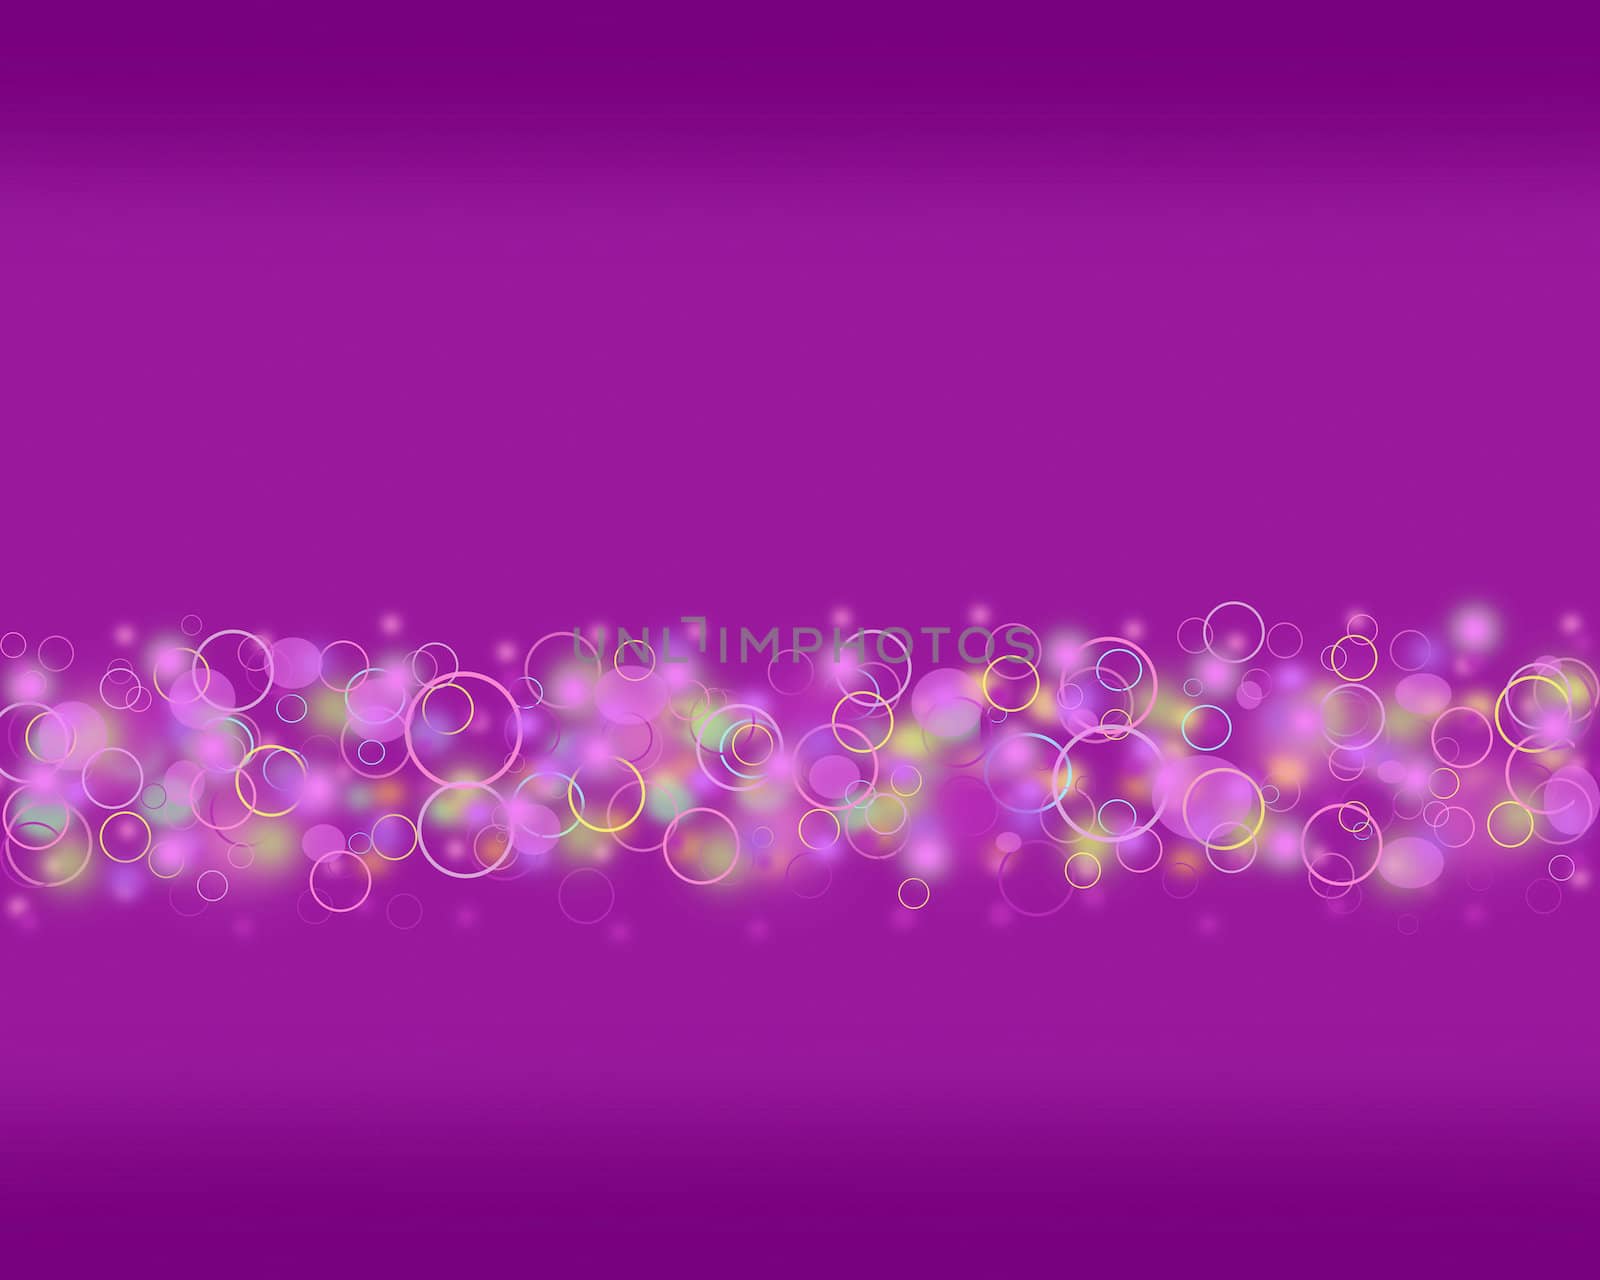 Abstract purple circle background